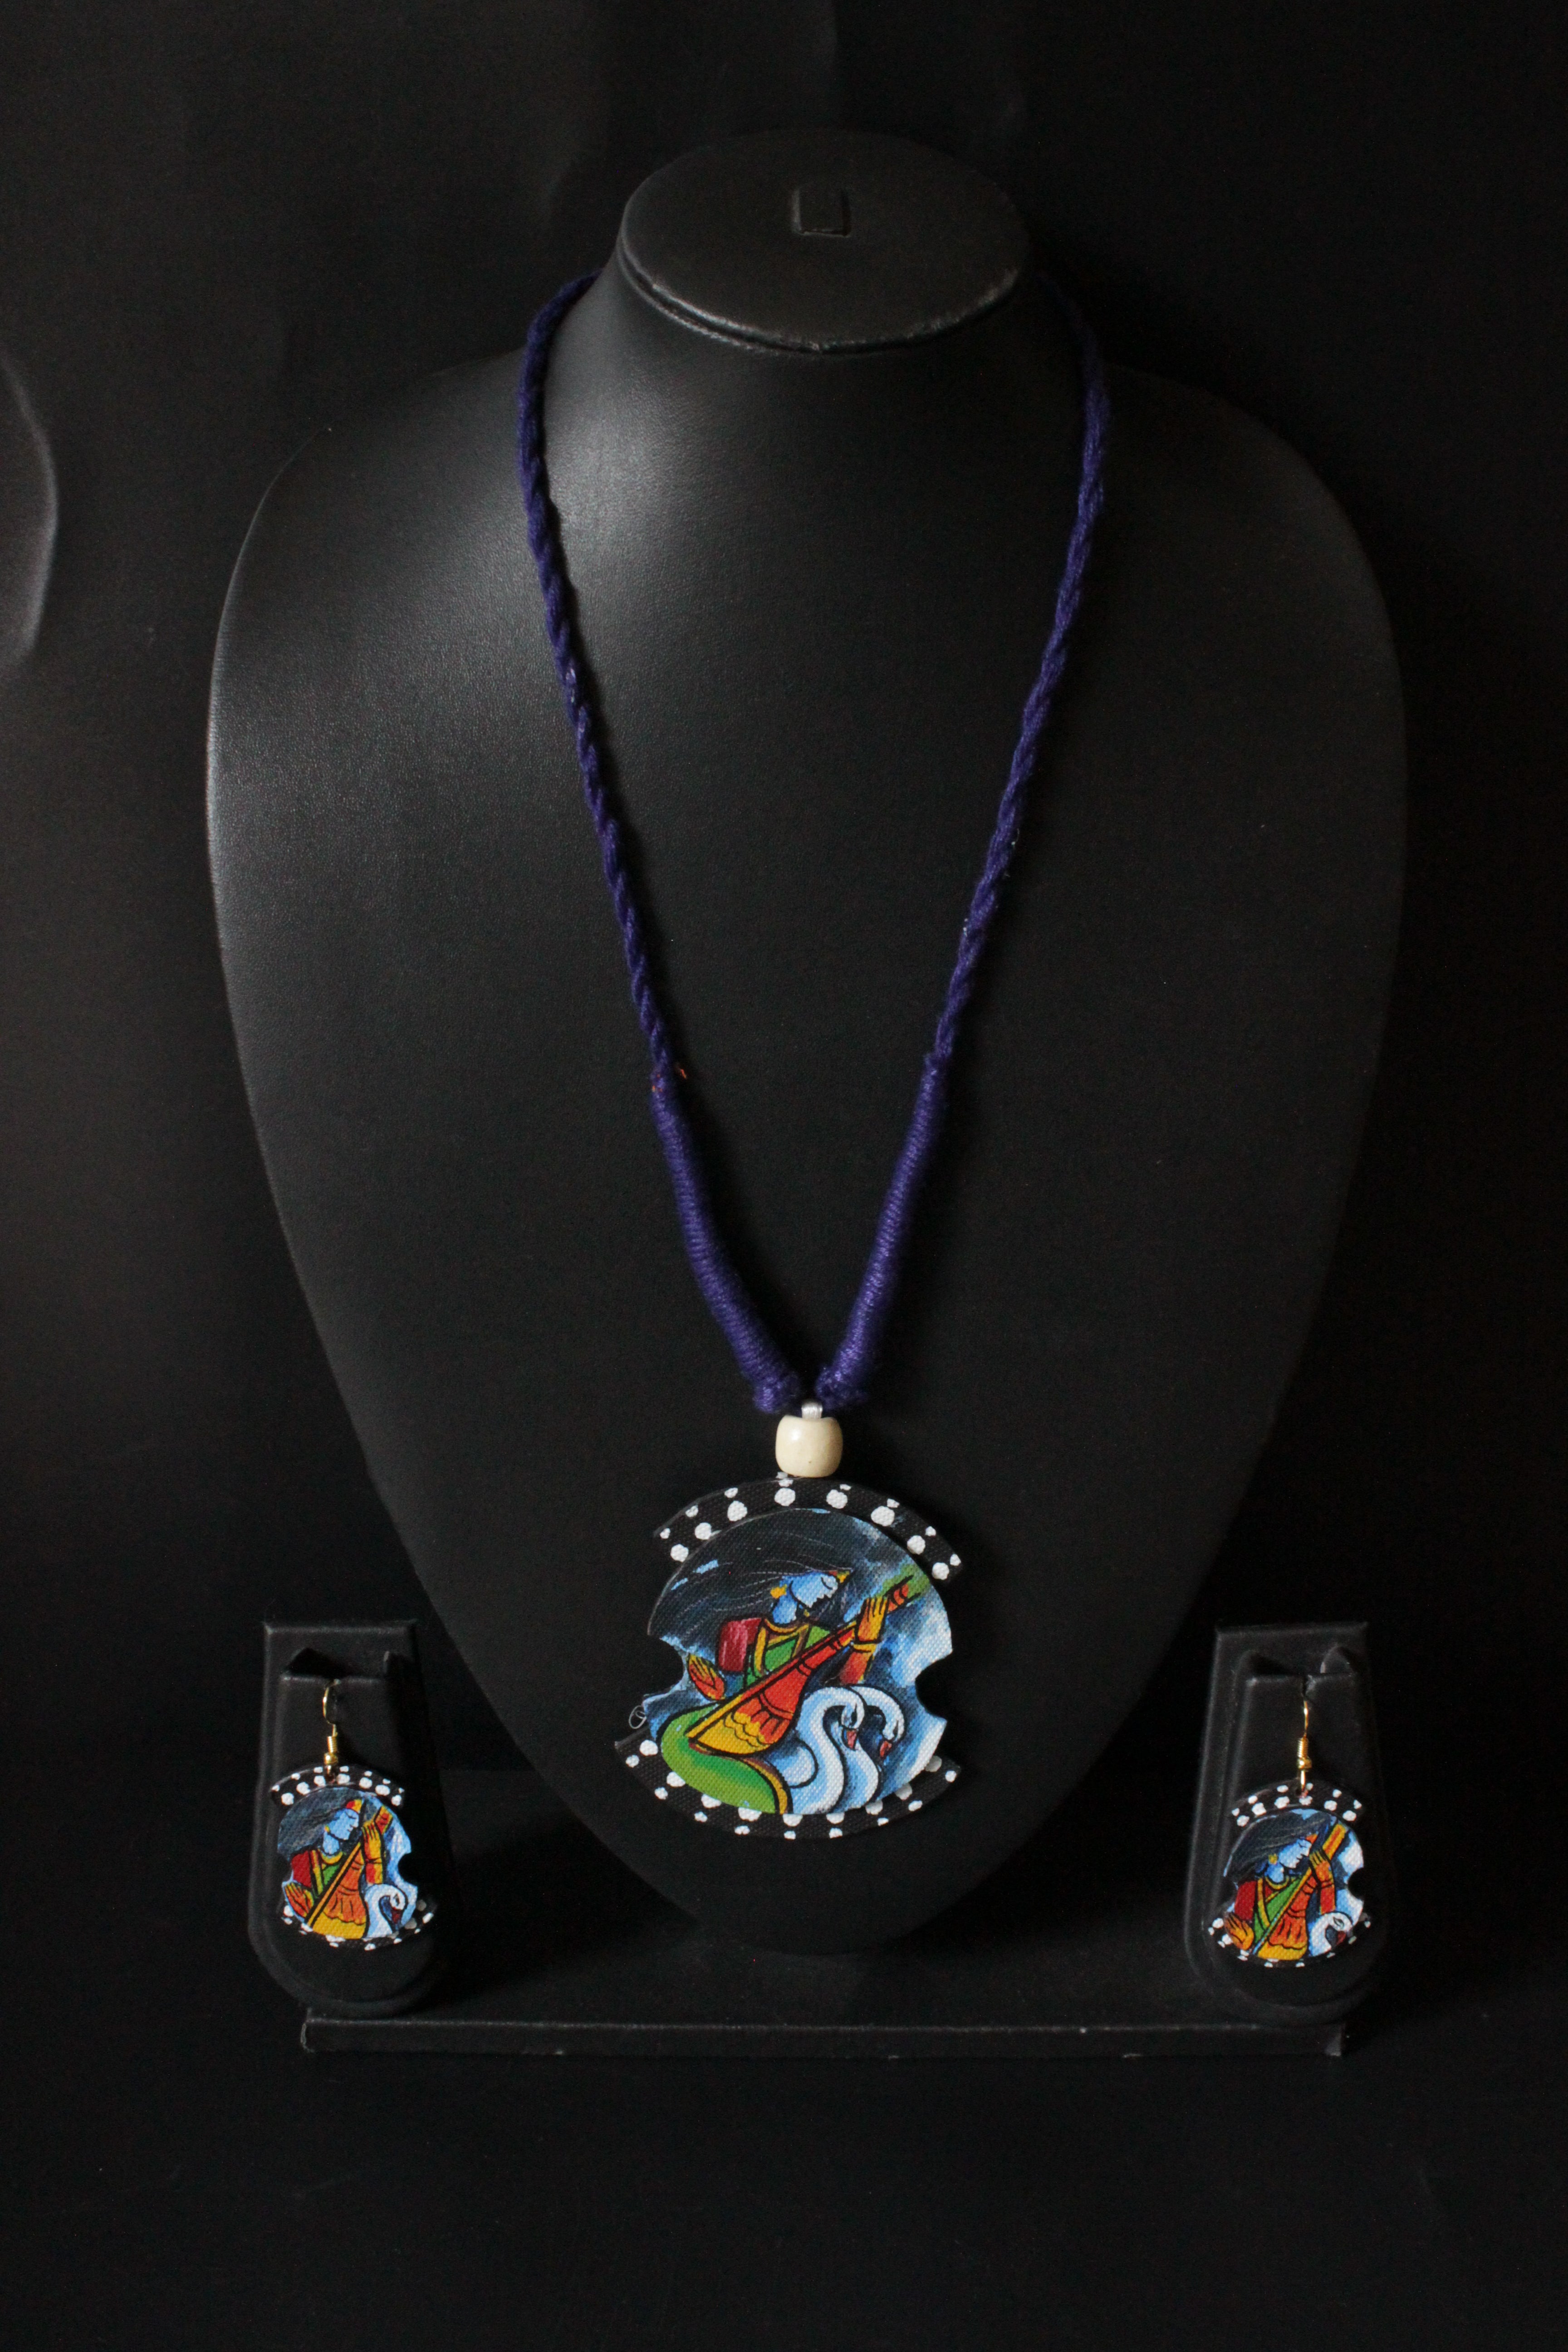 Hand Painted Religious Motif Necklace Set